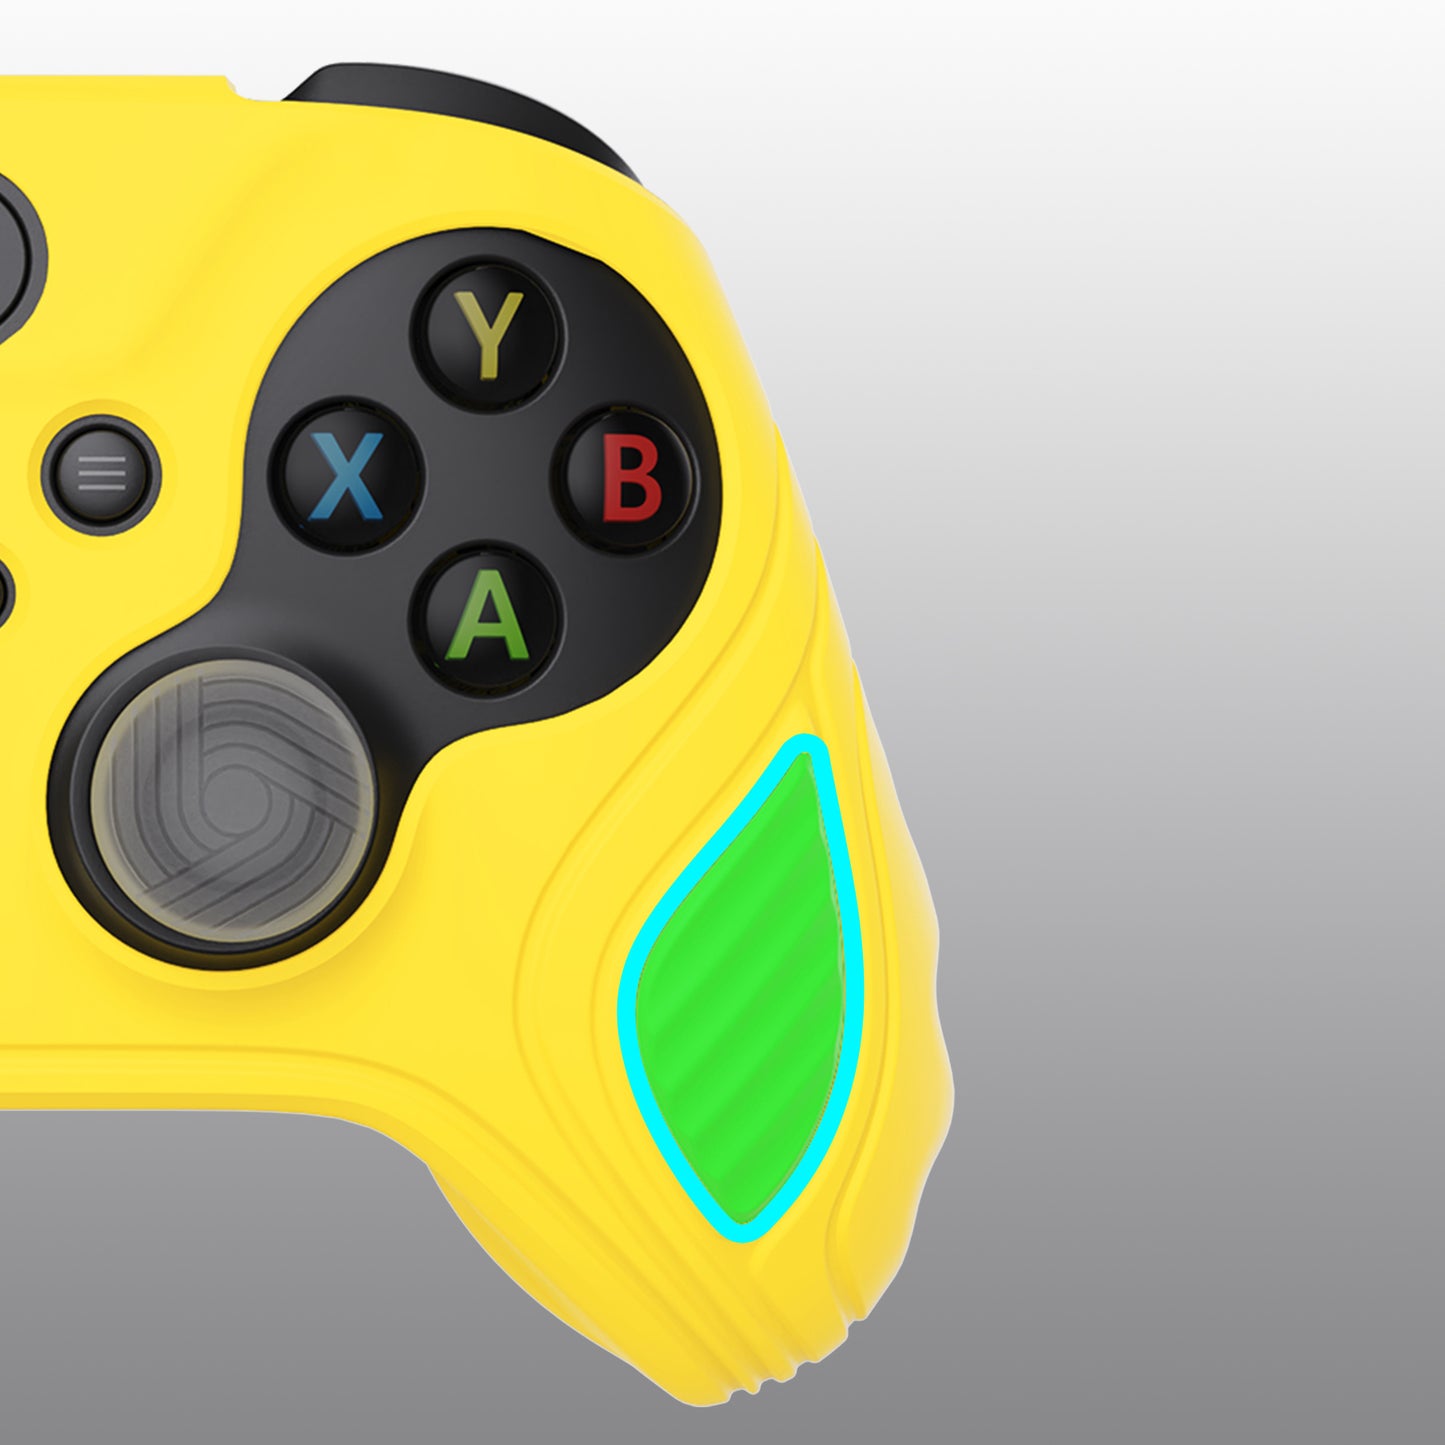 PlayVital Scorpion Edition Anti-Slip Silicone Case Cover for Xbox Series X/S Controller, Soft Rubber Case for Xbox Series X/S Controller with Thumb Grip Caps - Legend Yellow & Green -SPX3013 PlayVital